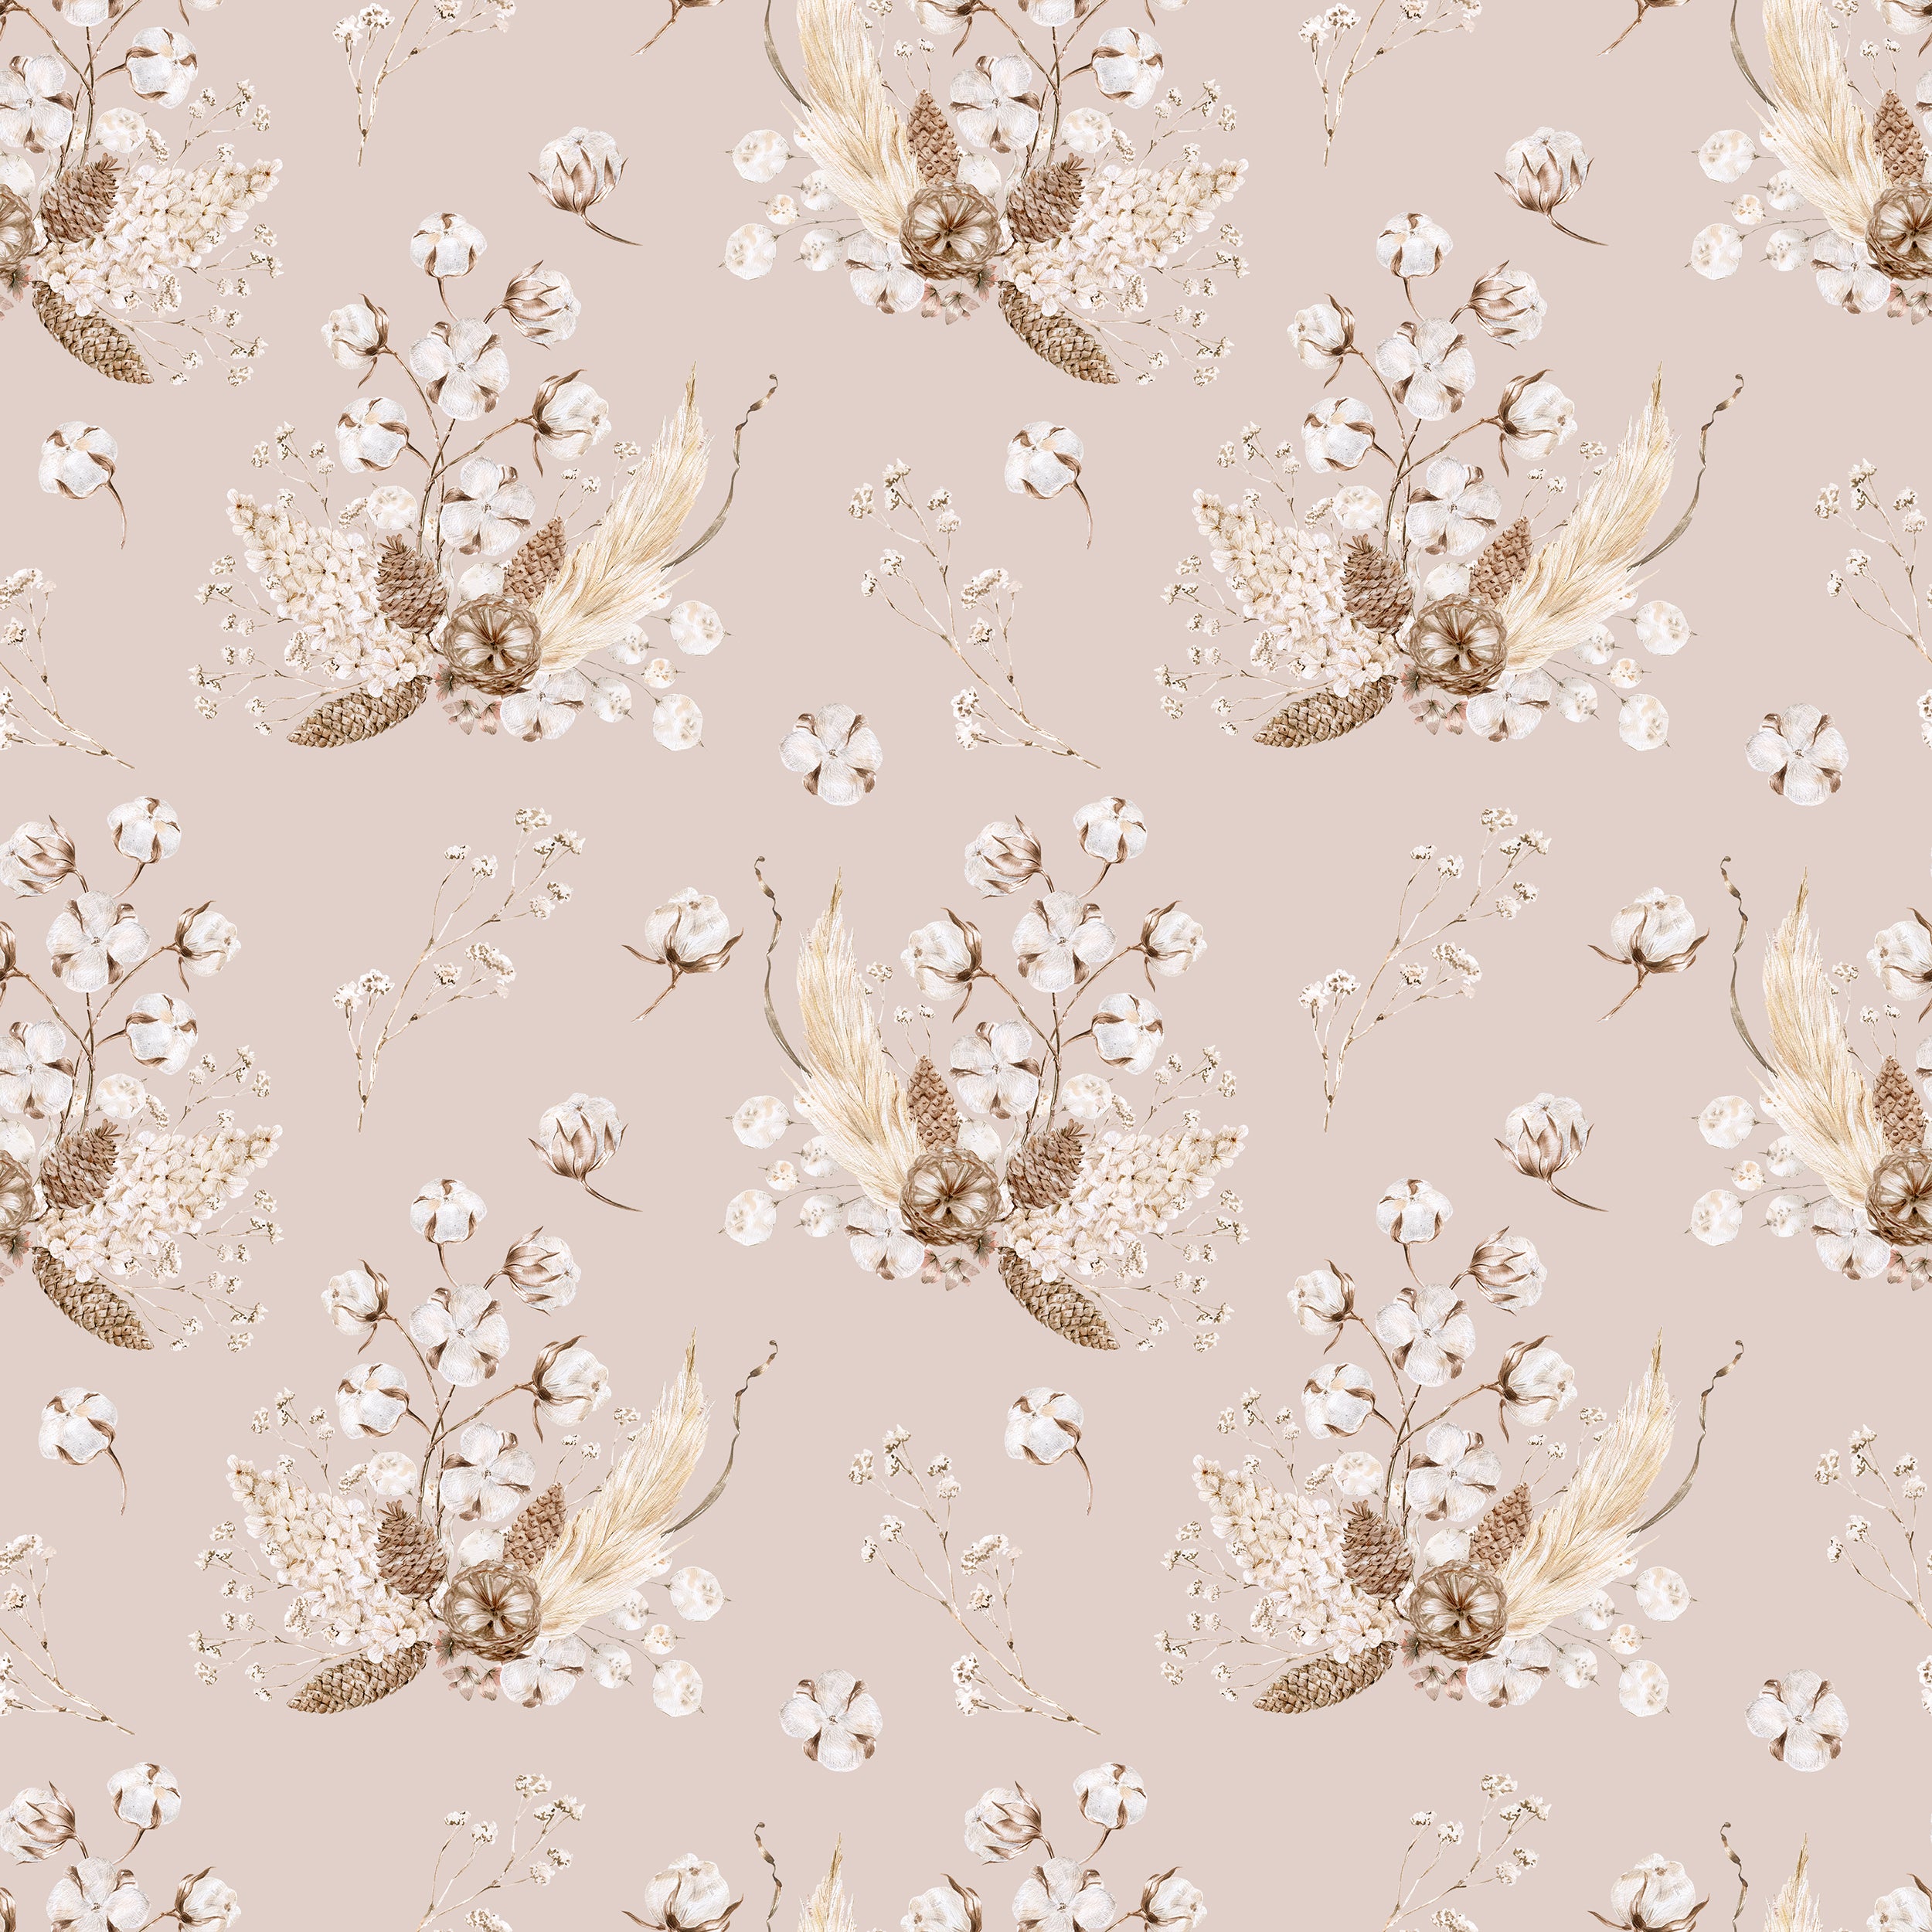 A close-up view of the 'Boho Bouquet II Wallpaper', presenting a bohemian floral pattern with blush pink flowers and gold-tinged foliage on a pastel pink backdrop. The wallpaper’s subtle tones and artistic design convey a tranquil, romantic atmosphere.